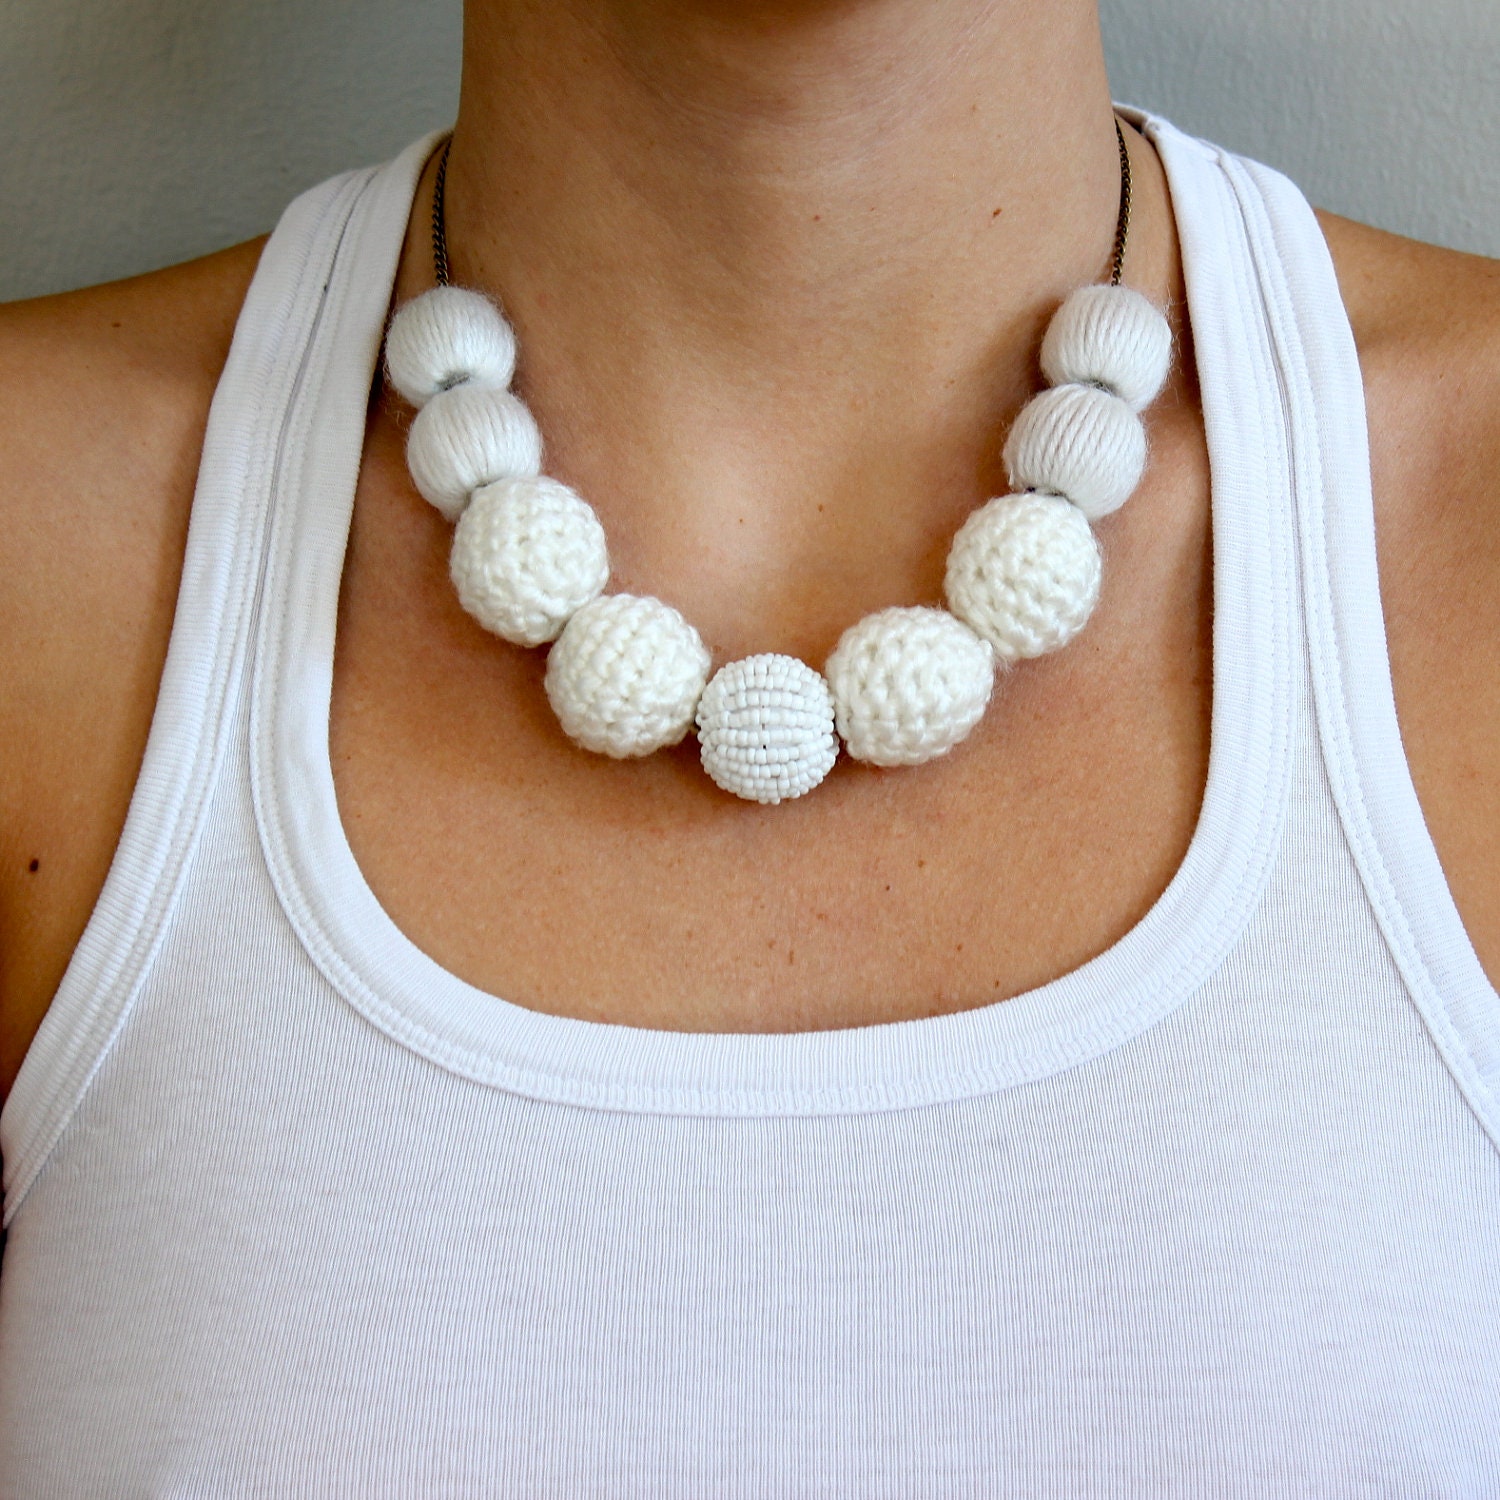 Handmade white wool and beads. Also comes with a handmade cotton bag for safekeeping. 